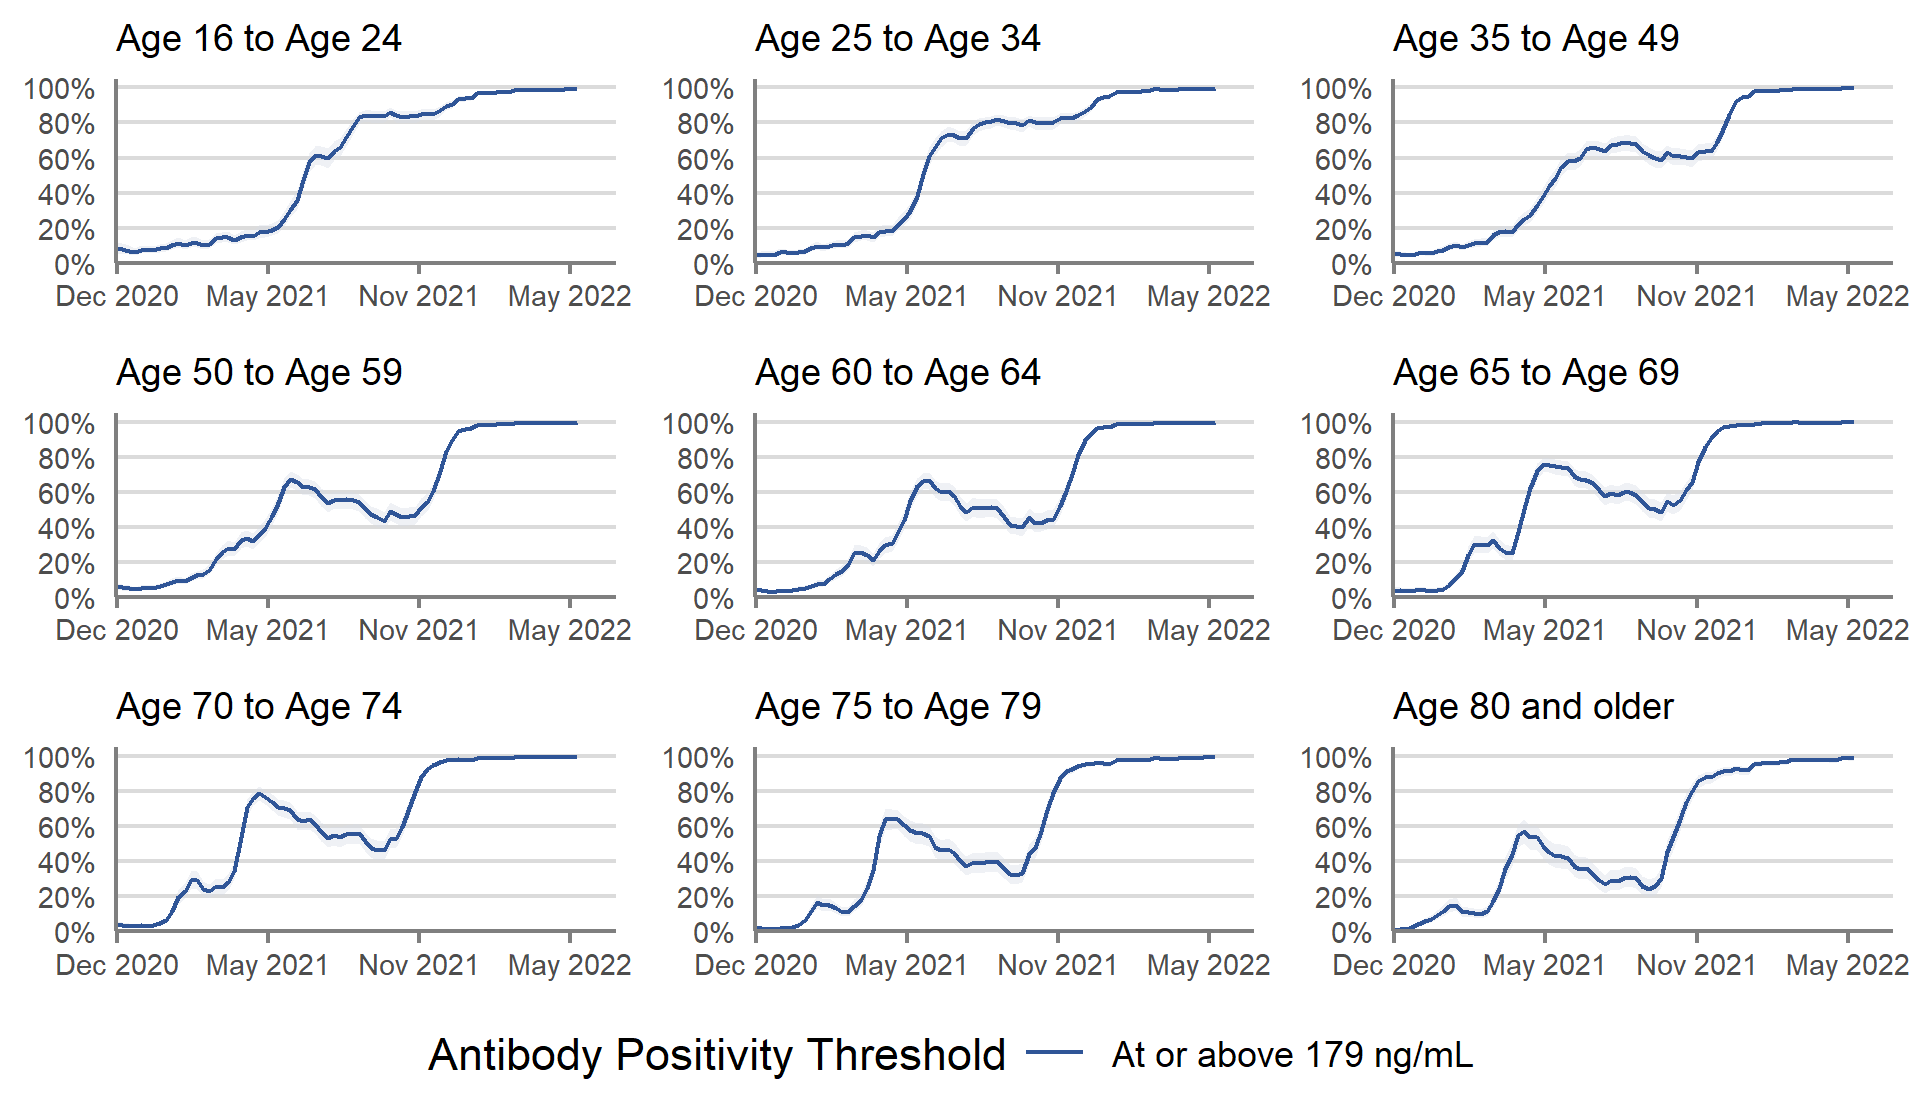 In recent weeks, the percentage of adults aged 16 years and above who are estimated to have antibodies against COVID-19 at or above the level of 179 ng/ml has continued to remain high across all age groups in Scotland.